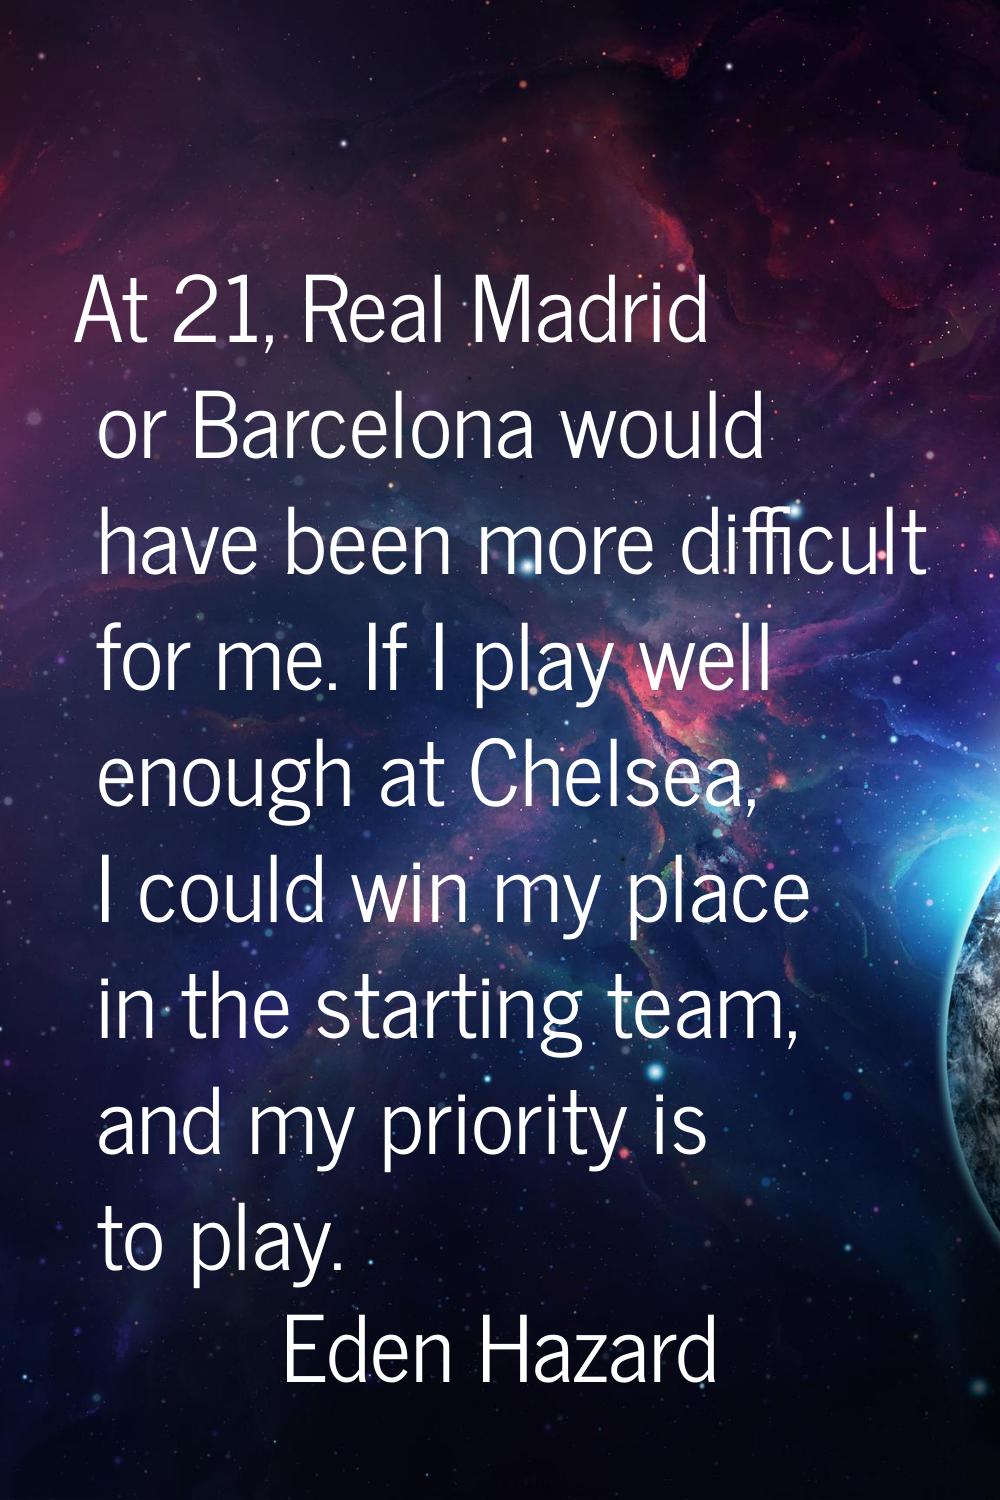 At 21, Real Madrid or Barcelona would have been more difficult for me. If I play well enough at Che